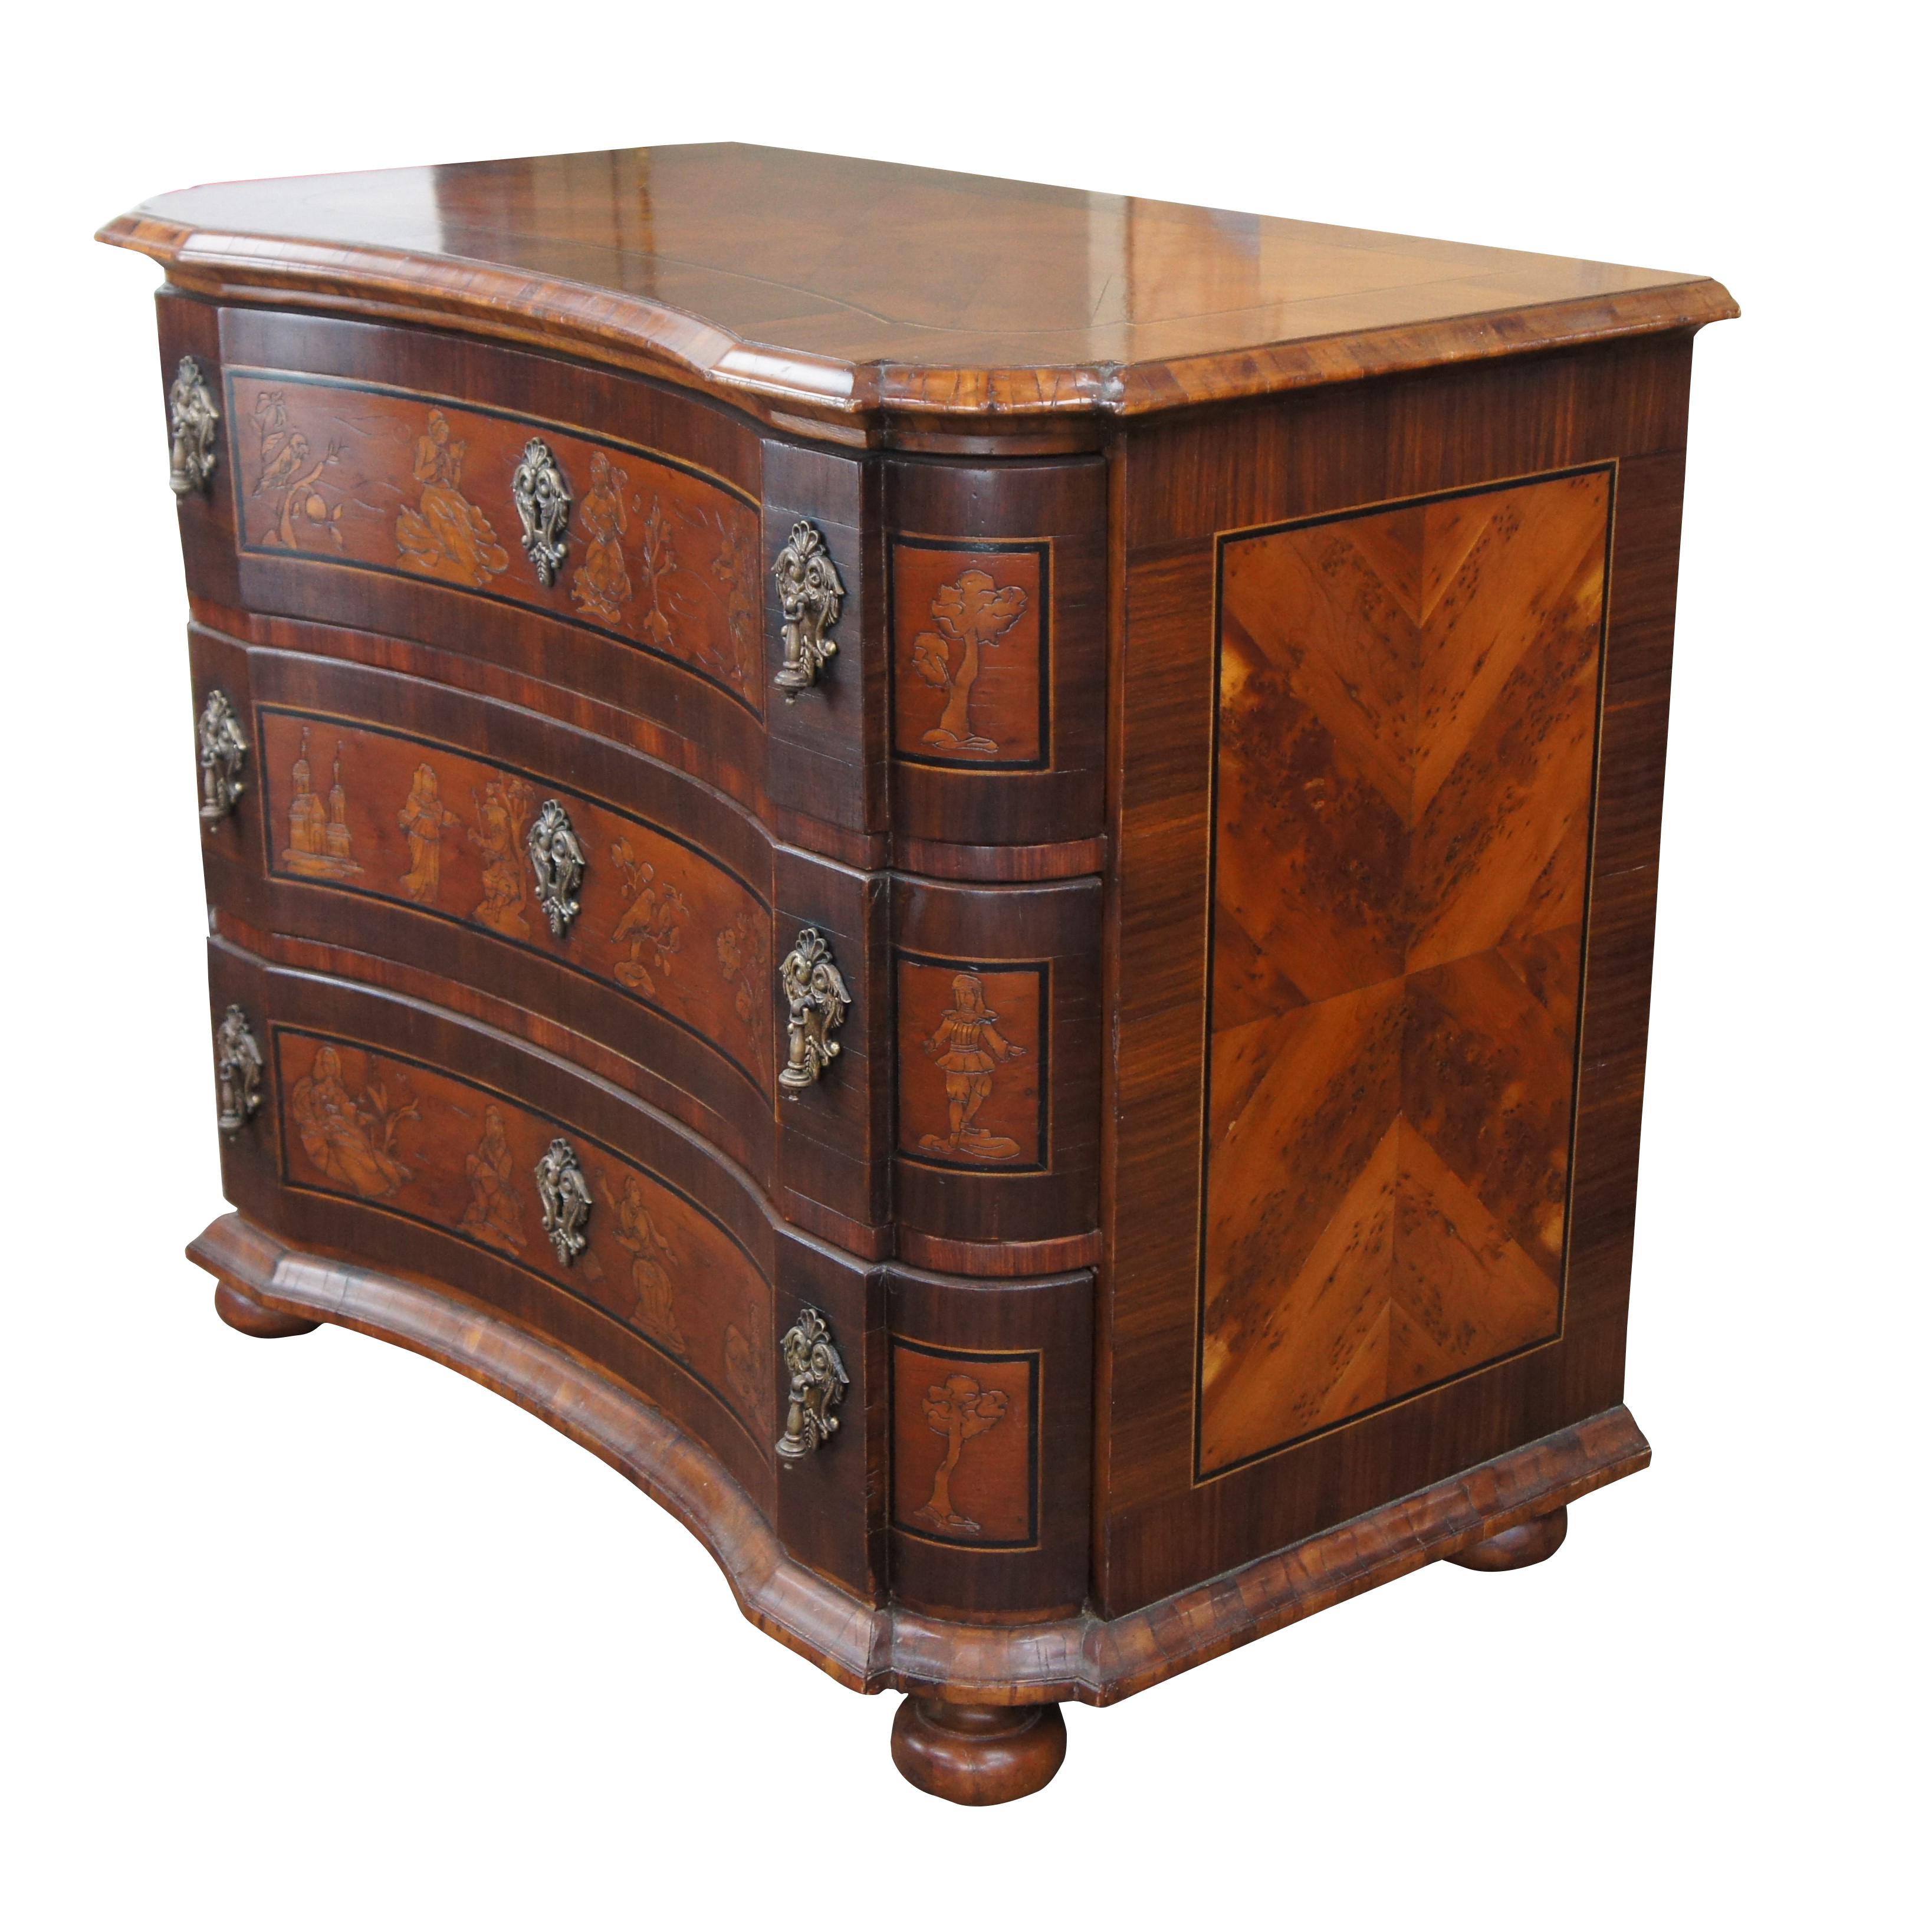 An exceptional Chinoiserie chest of drawers by Alfonso Marina. A serpentine form made of mahogany, walnut and exotic matchbook burled panels with cossbanding. The front of the chest showcases three drawers centered by oriental scenes with wise men,